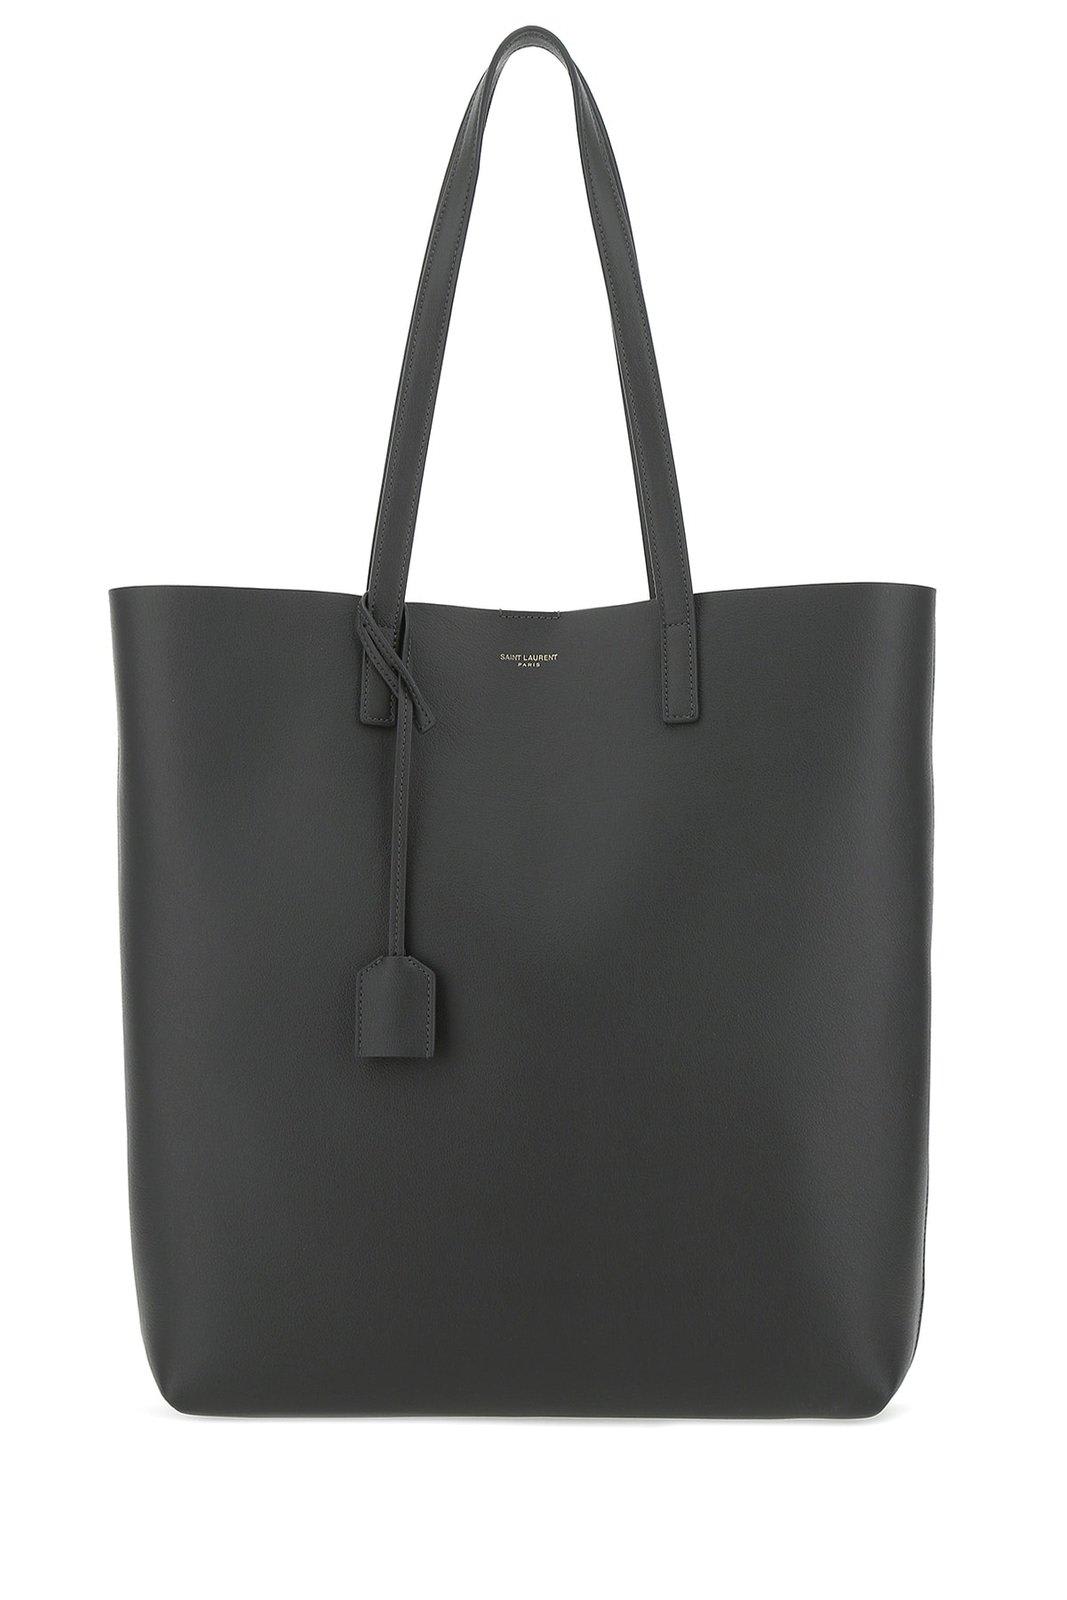 SAINT LAURENT N/S Shopping Leather Tote Bag